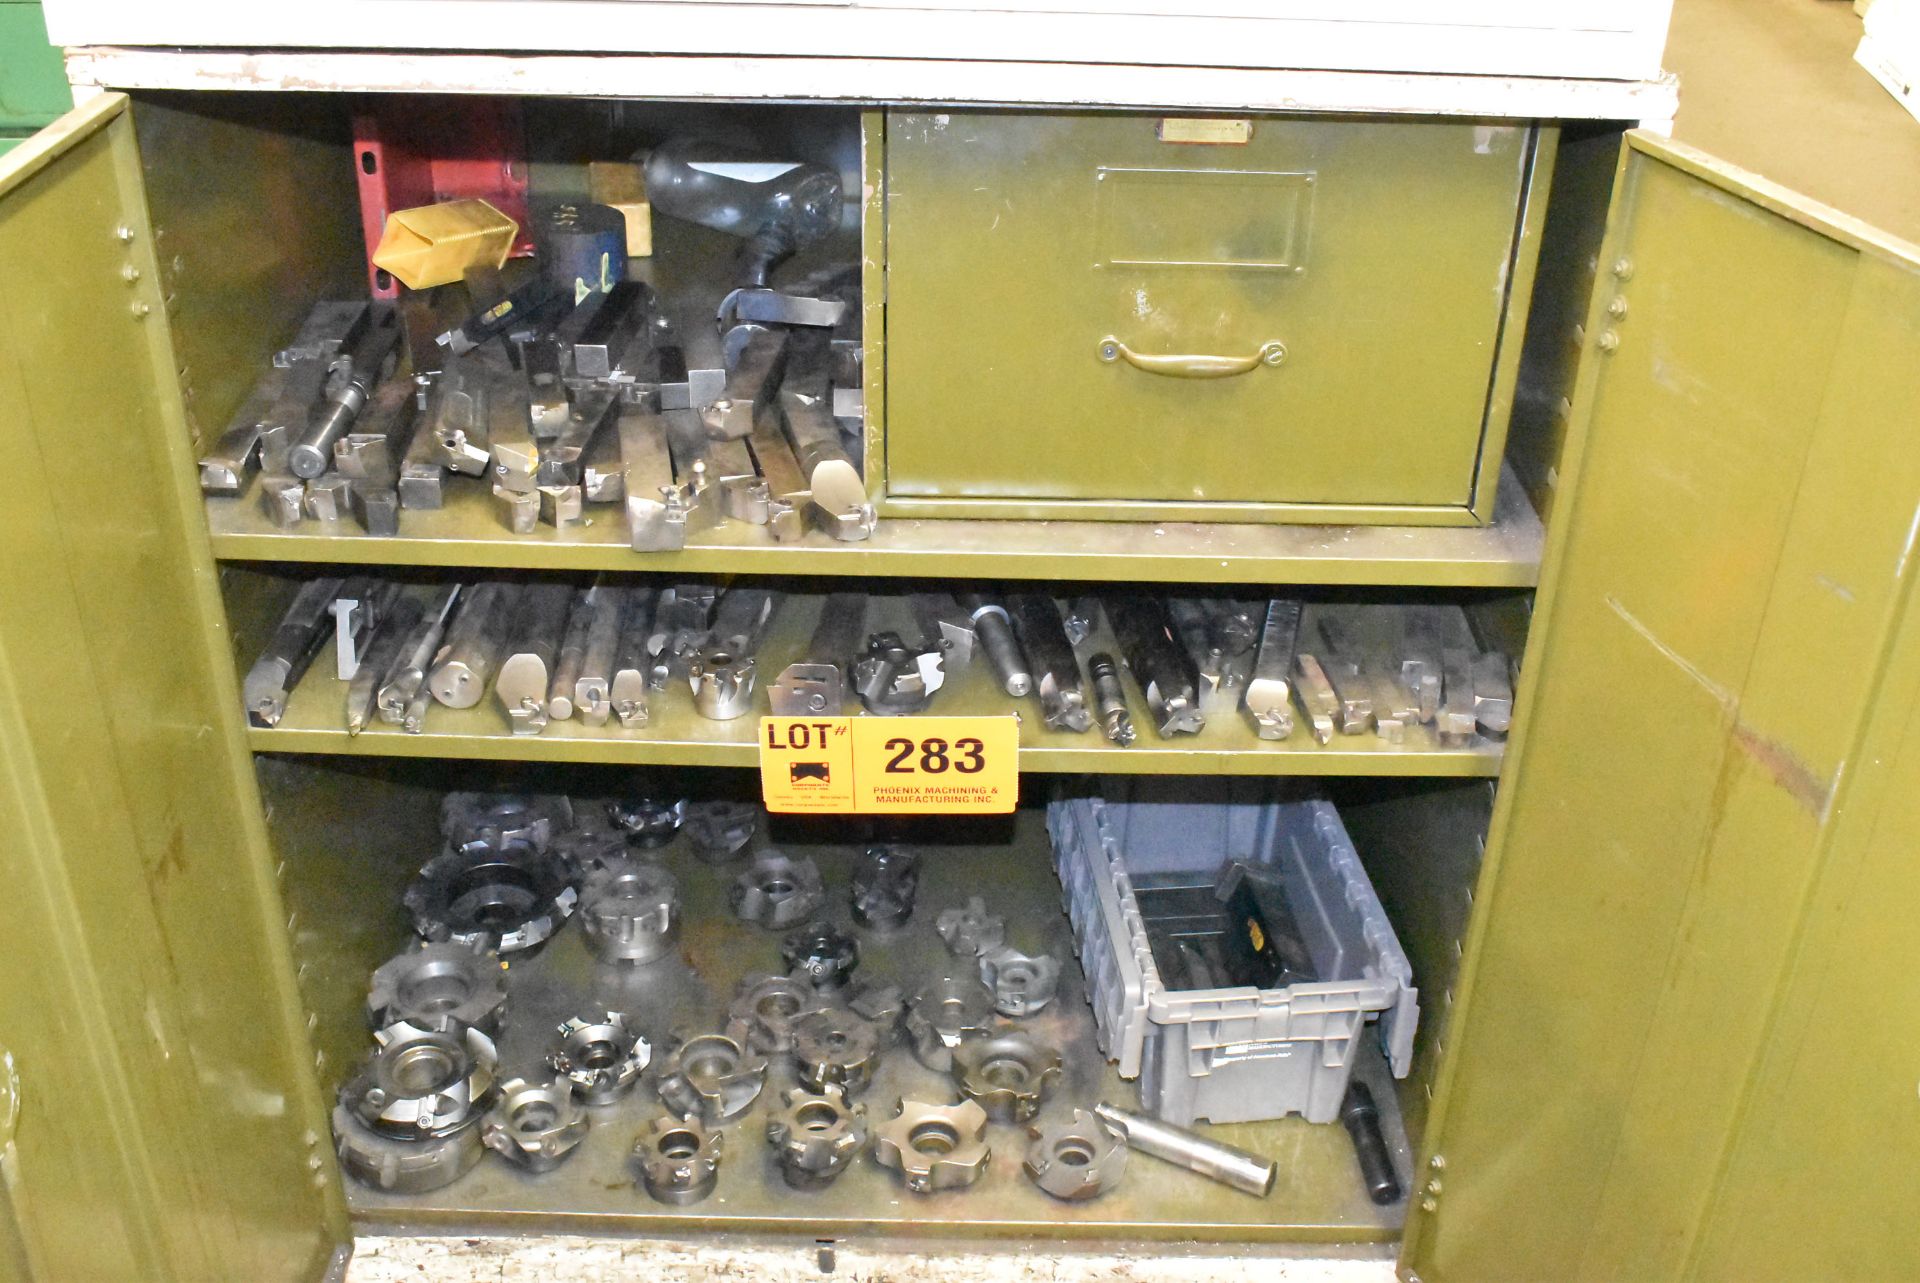 LOT/ CONTENTS OF CABINET - HSS AND CARBIDE INSERT LATHE CUTTERS AND BORING BARS, CARBIDE INSERT FACE